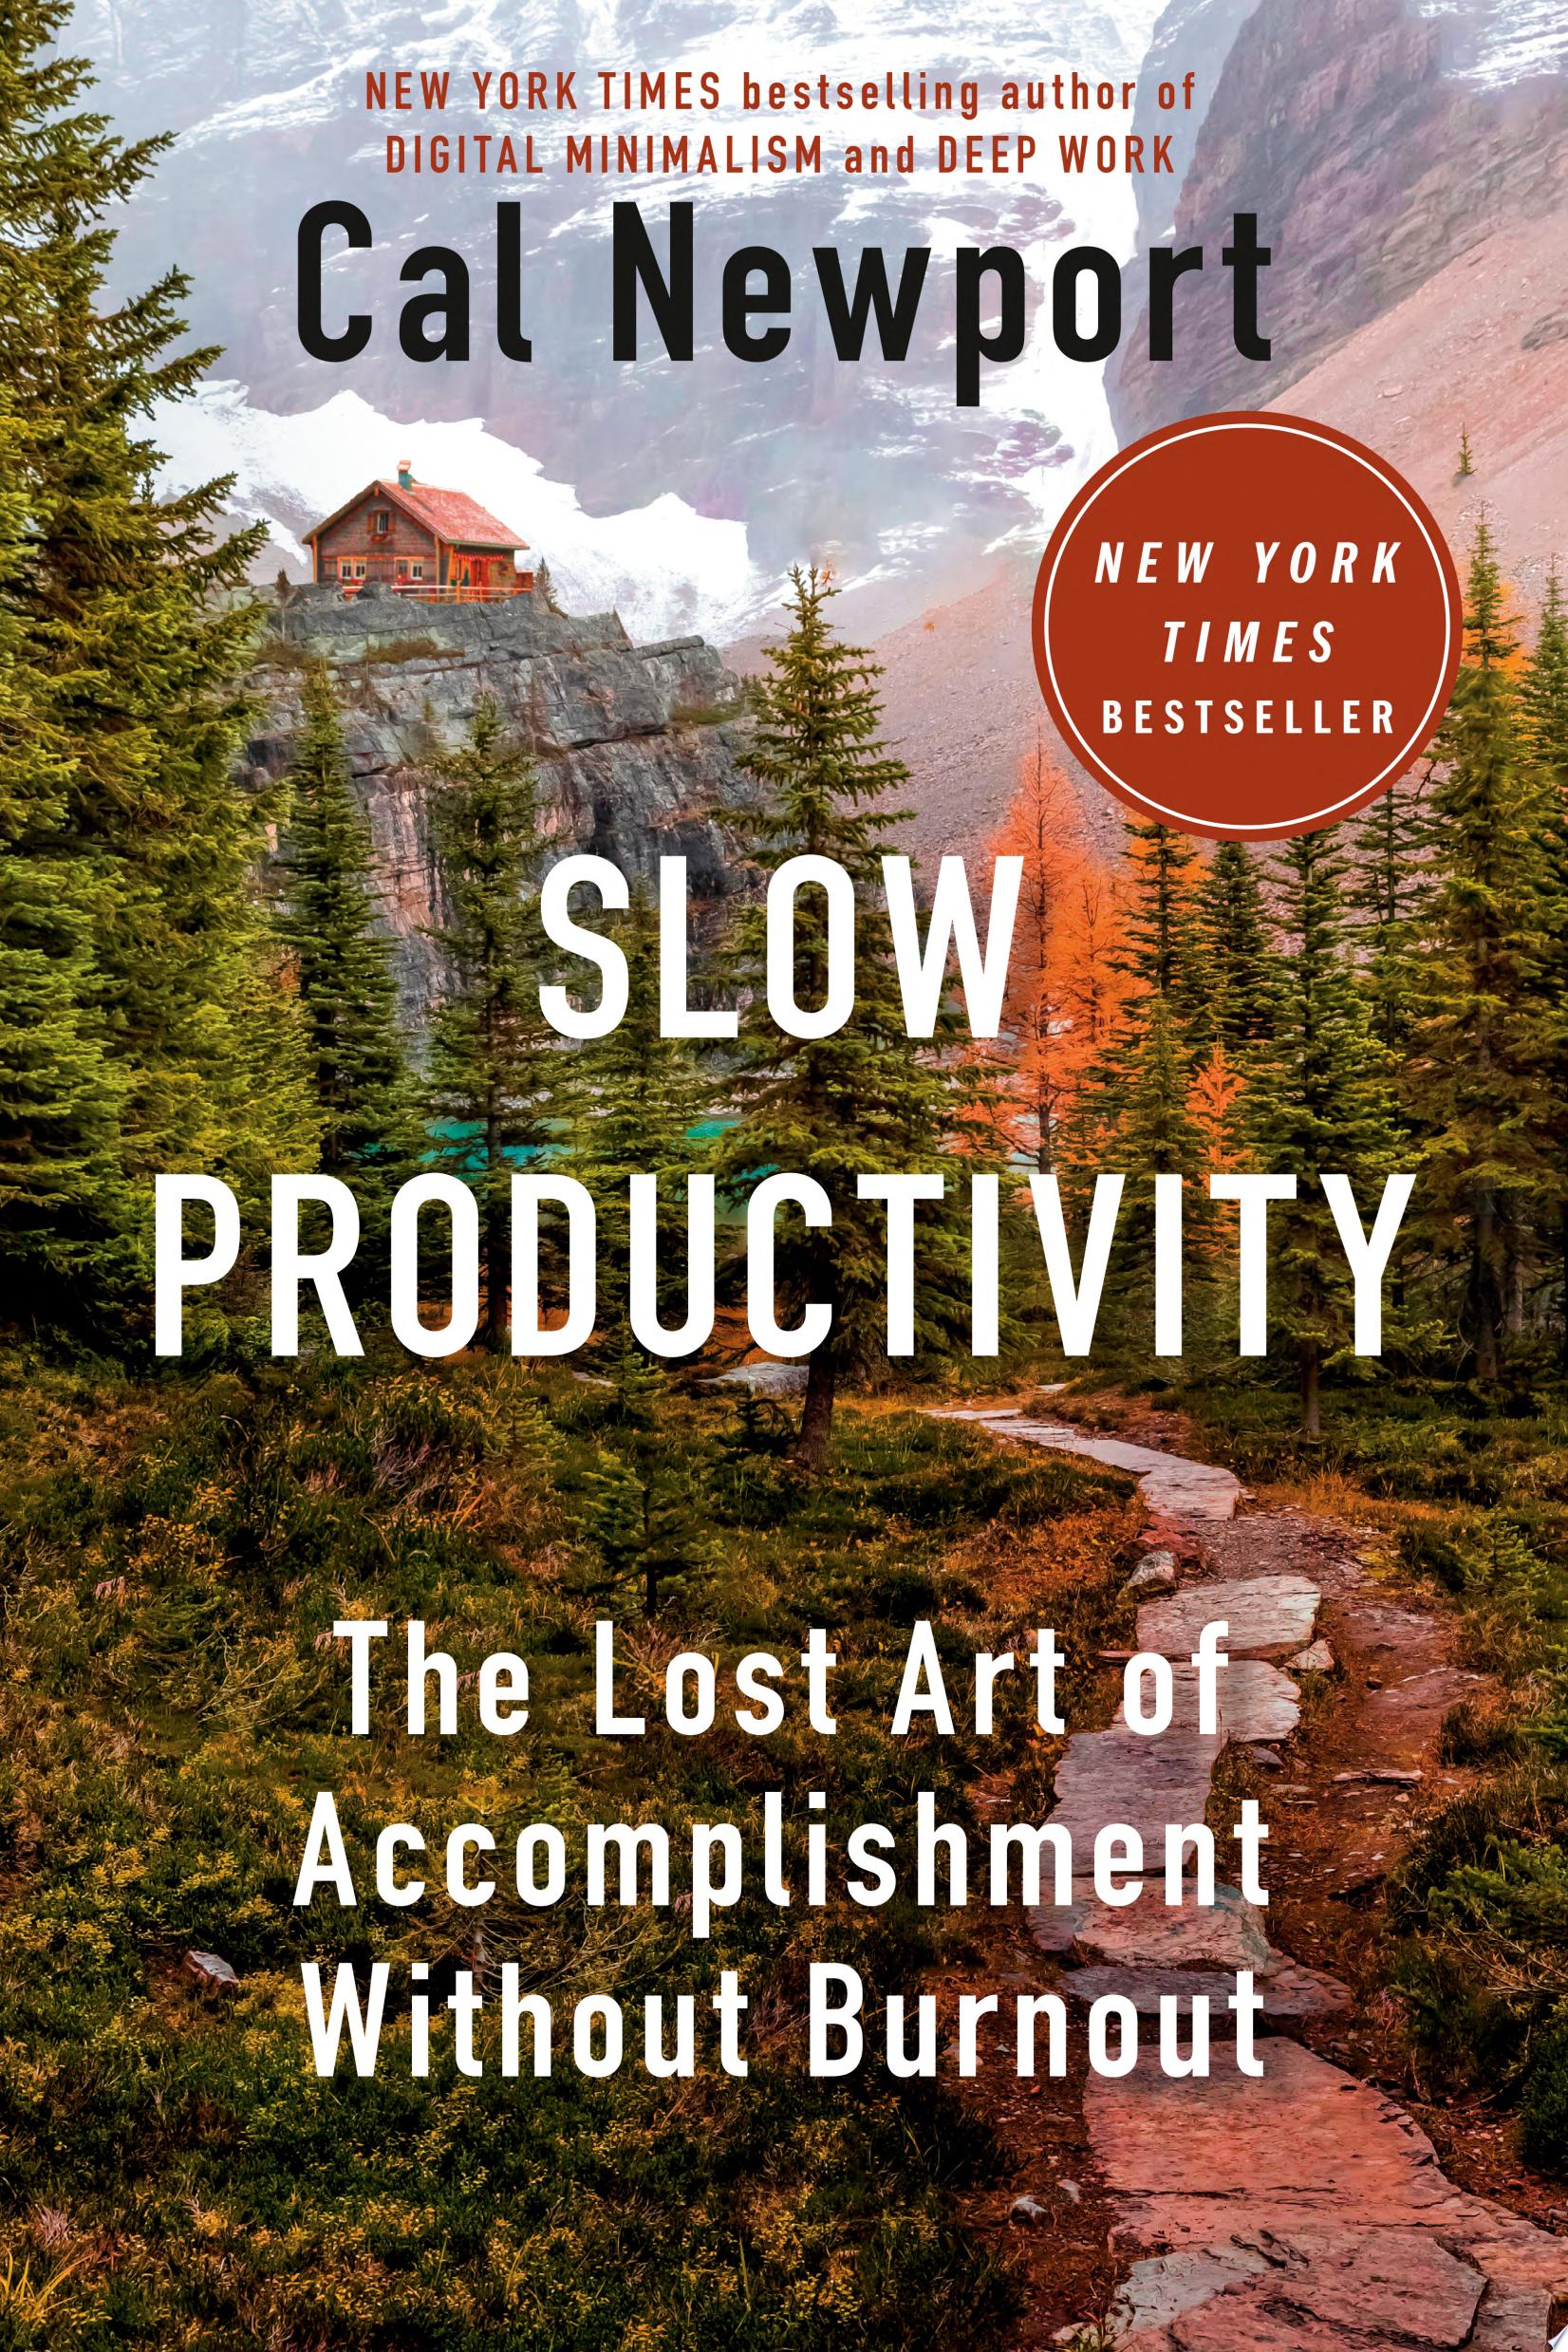 Image for "Slow Productivity"